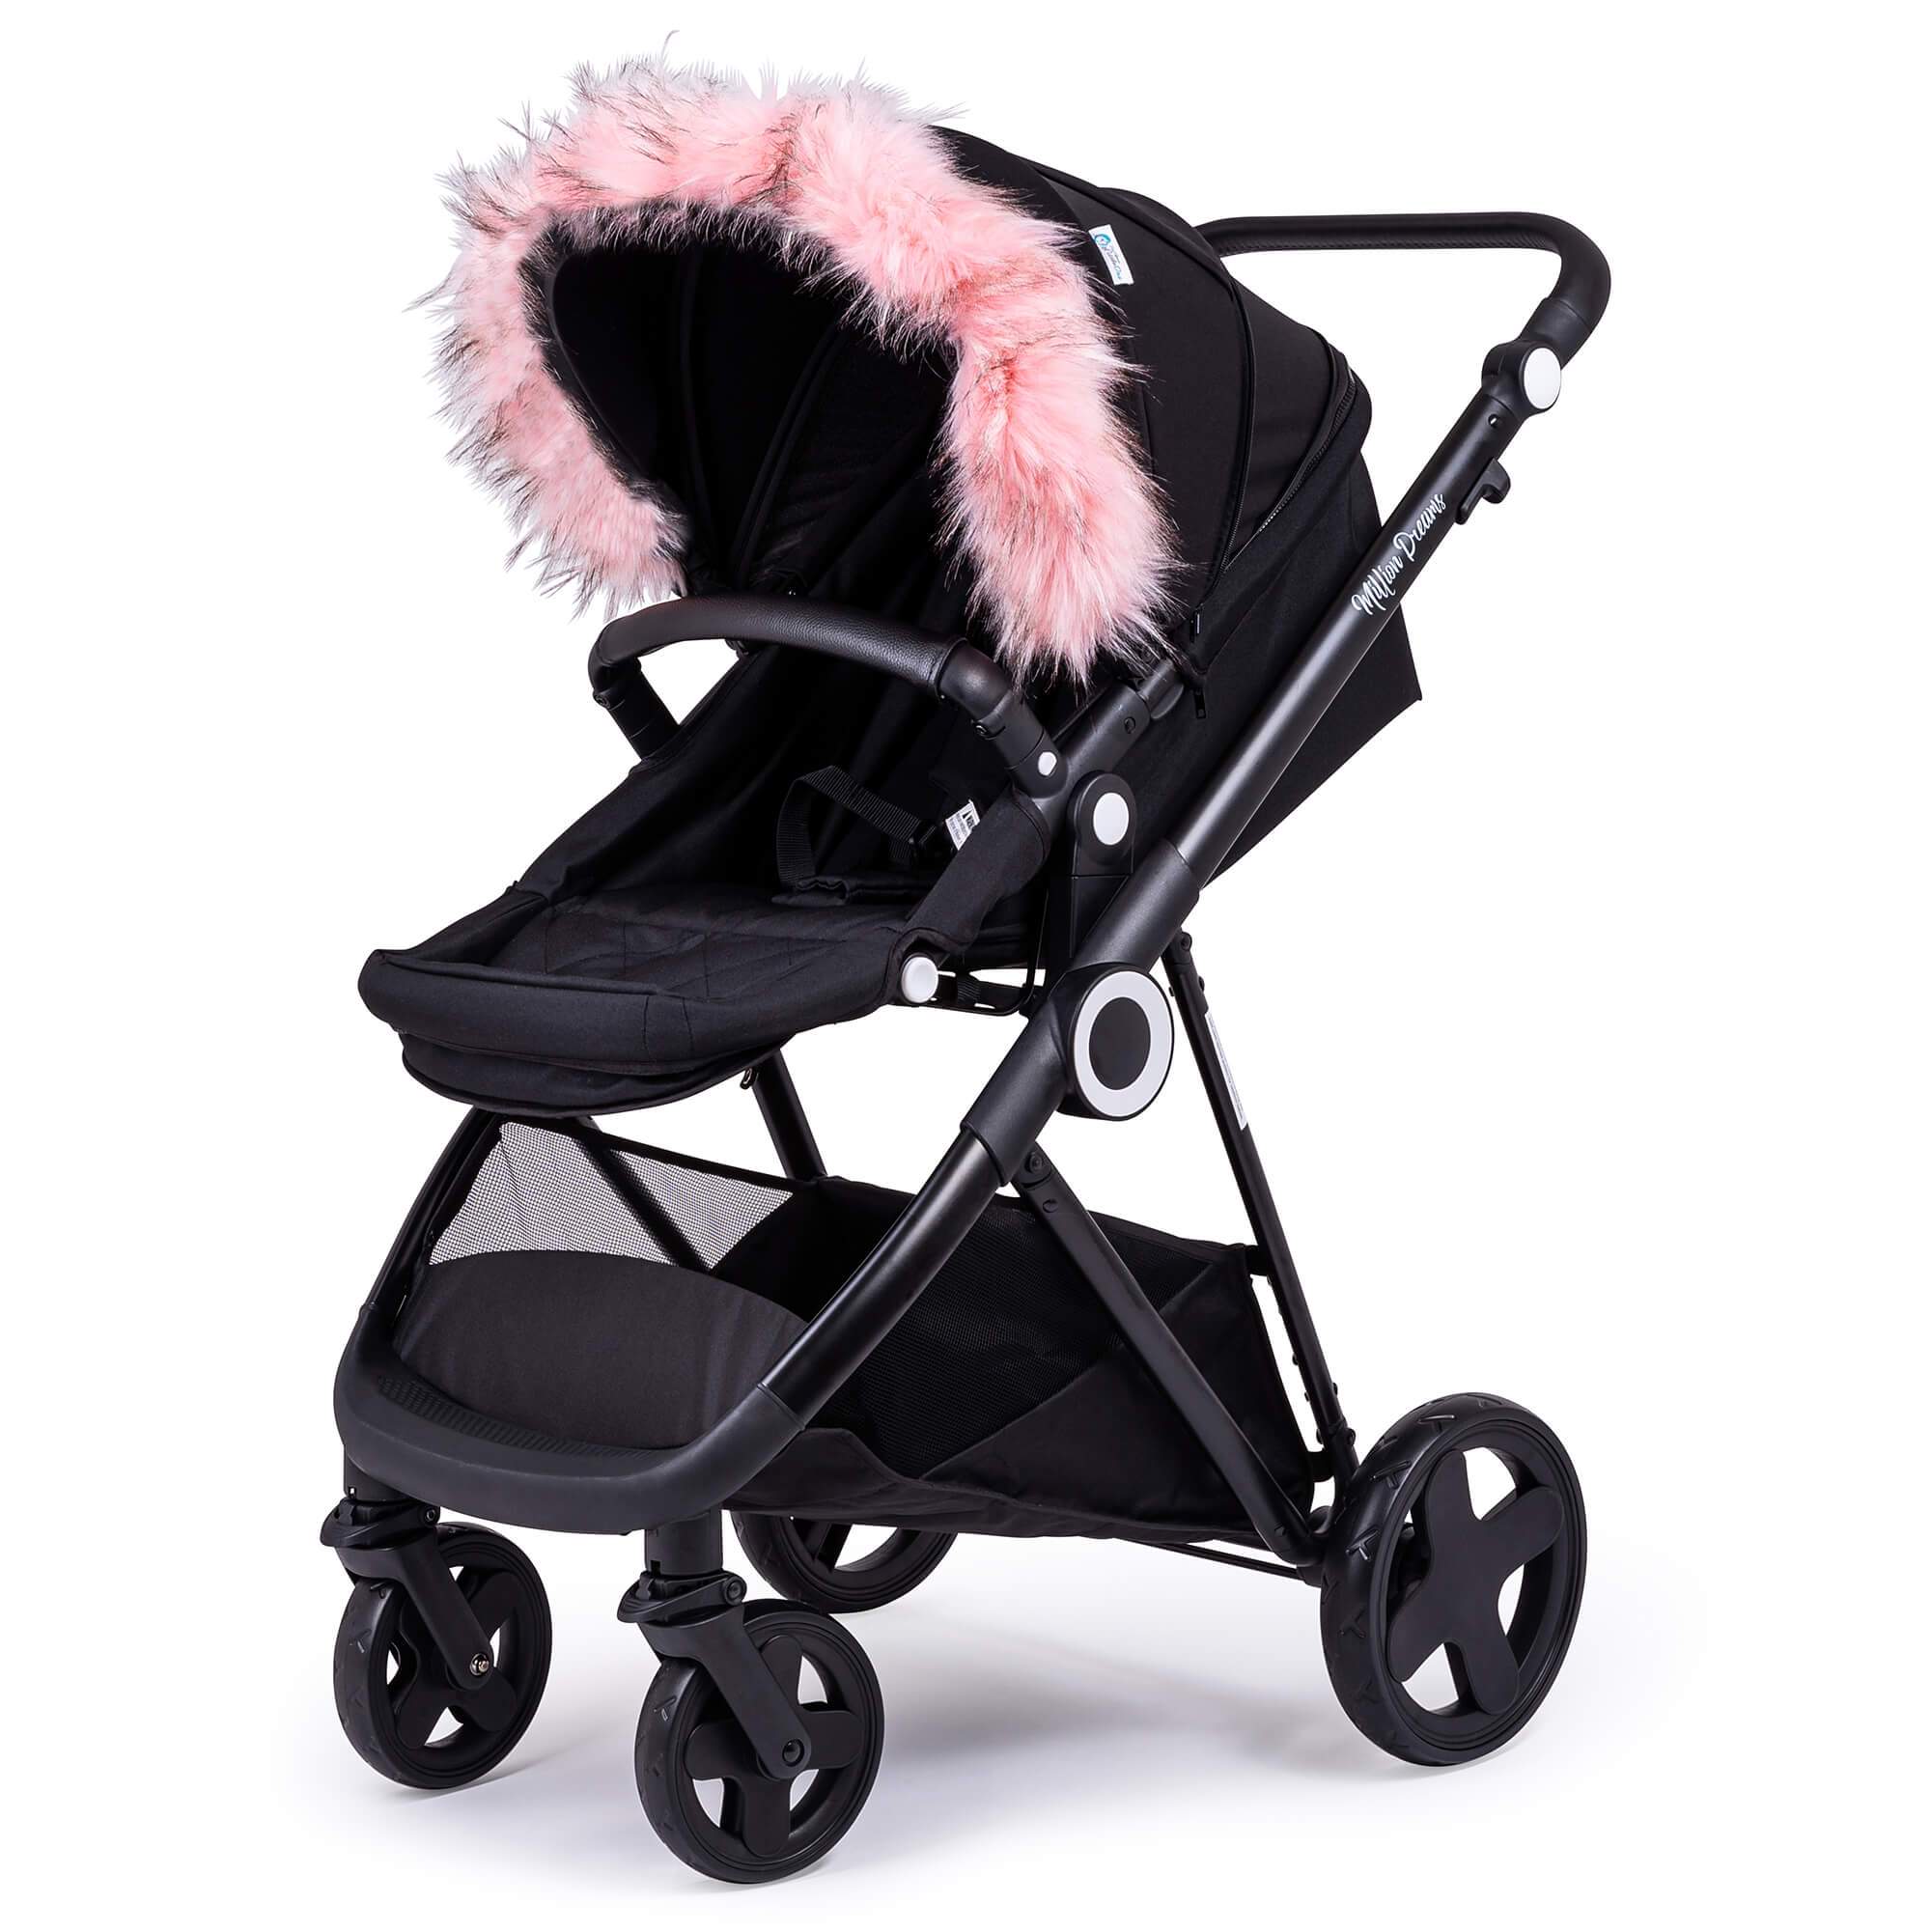 Pram Fur Hood Trim Attachment for Pushchair Compatible with Looping - Light Pink / Fits All Models | For Your Little One